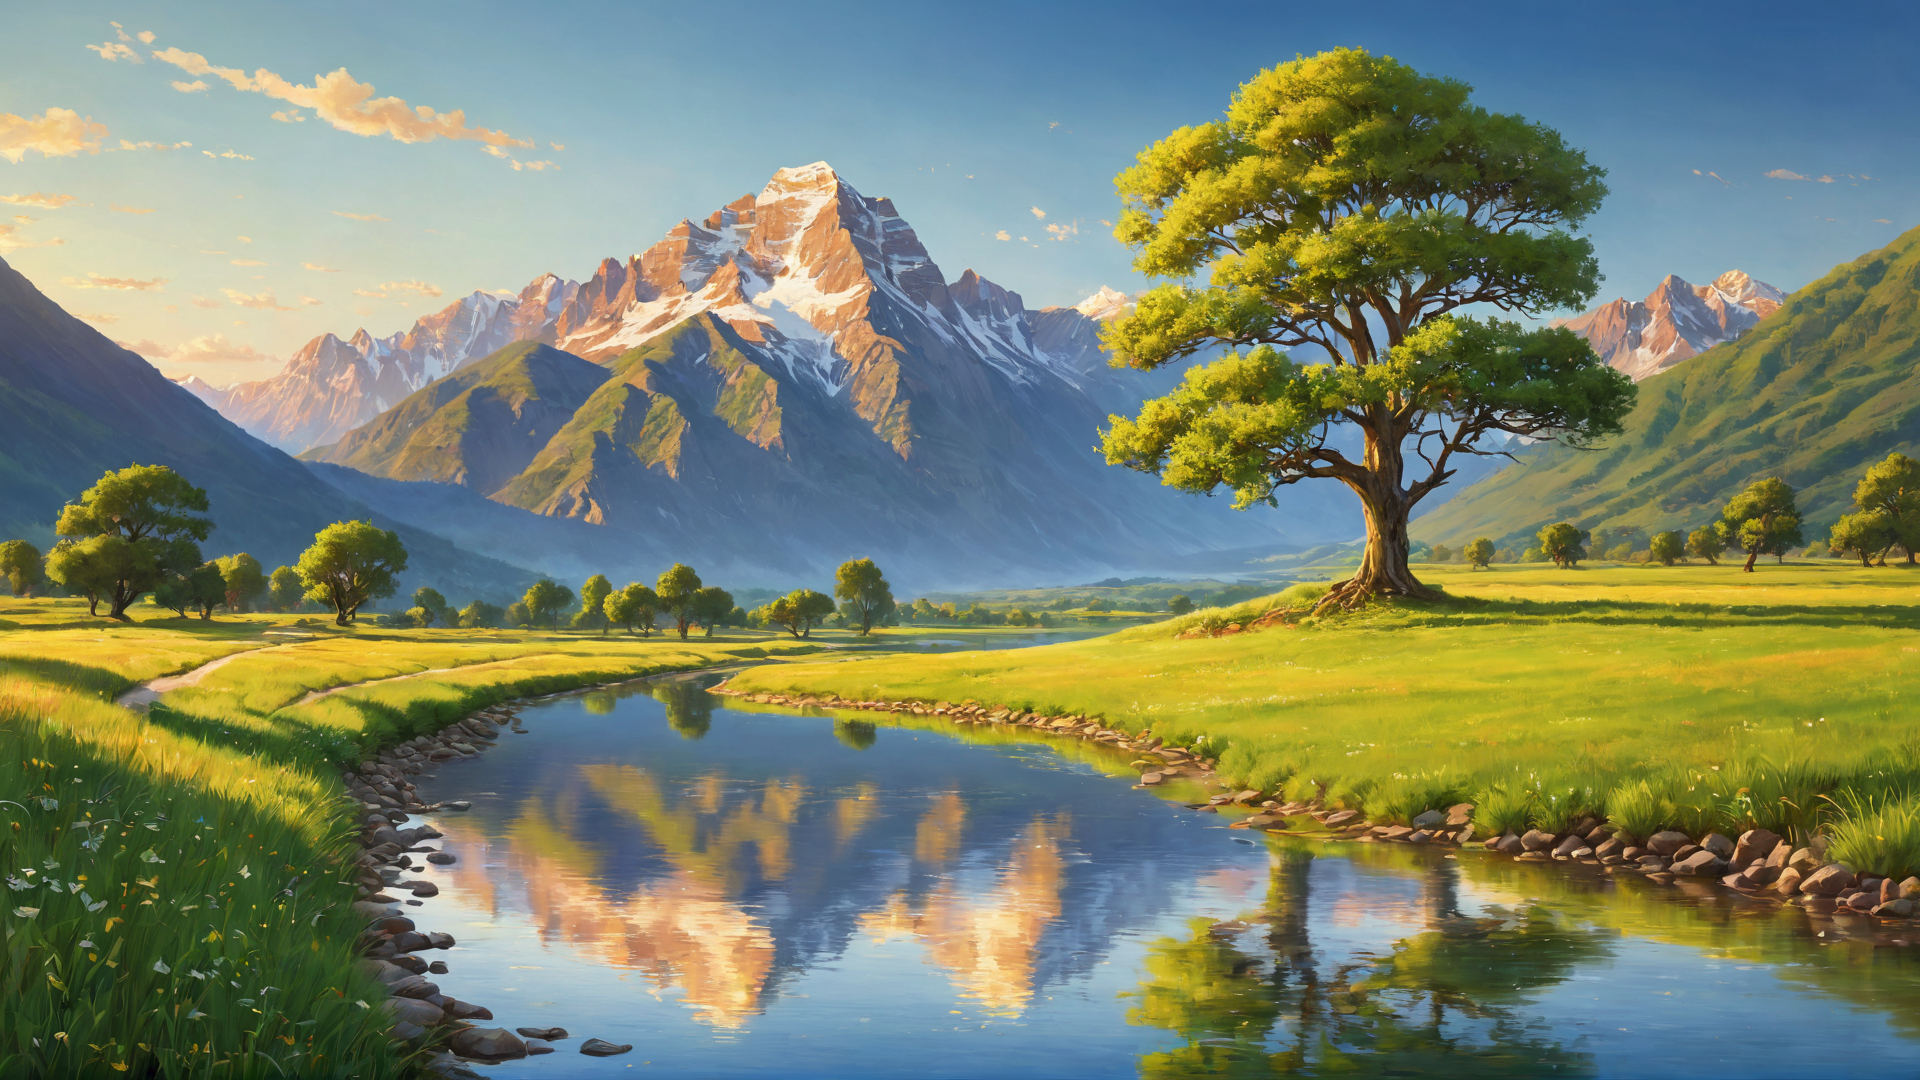 A lone tree stands resilient in an open field, its leaves a mix of vibrant greens with hints of red, yellow, and orange, symbolizing the blend of life's demands within the tranquility of nature. A reflective river and distant, sunlit mountains remind us of the journey towards living a life true to our deepest values.